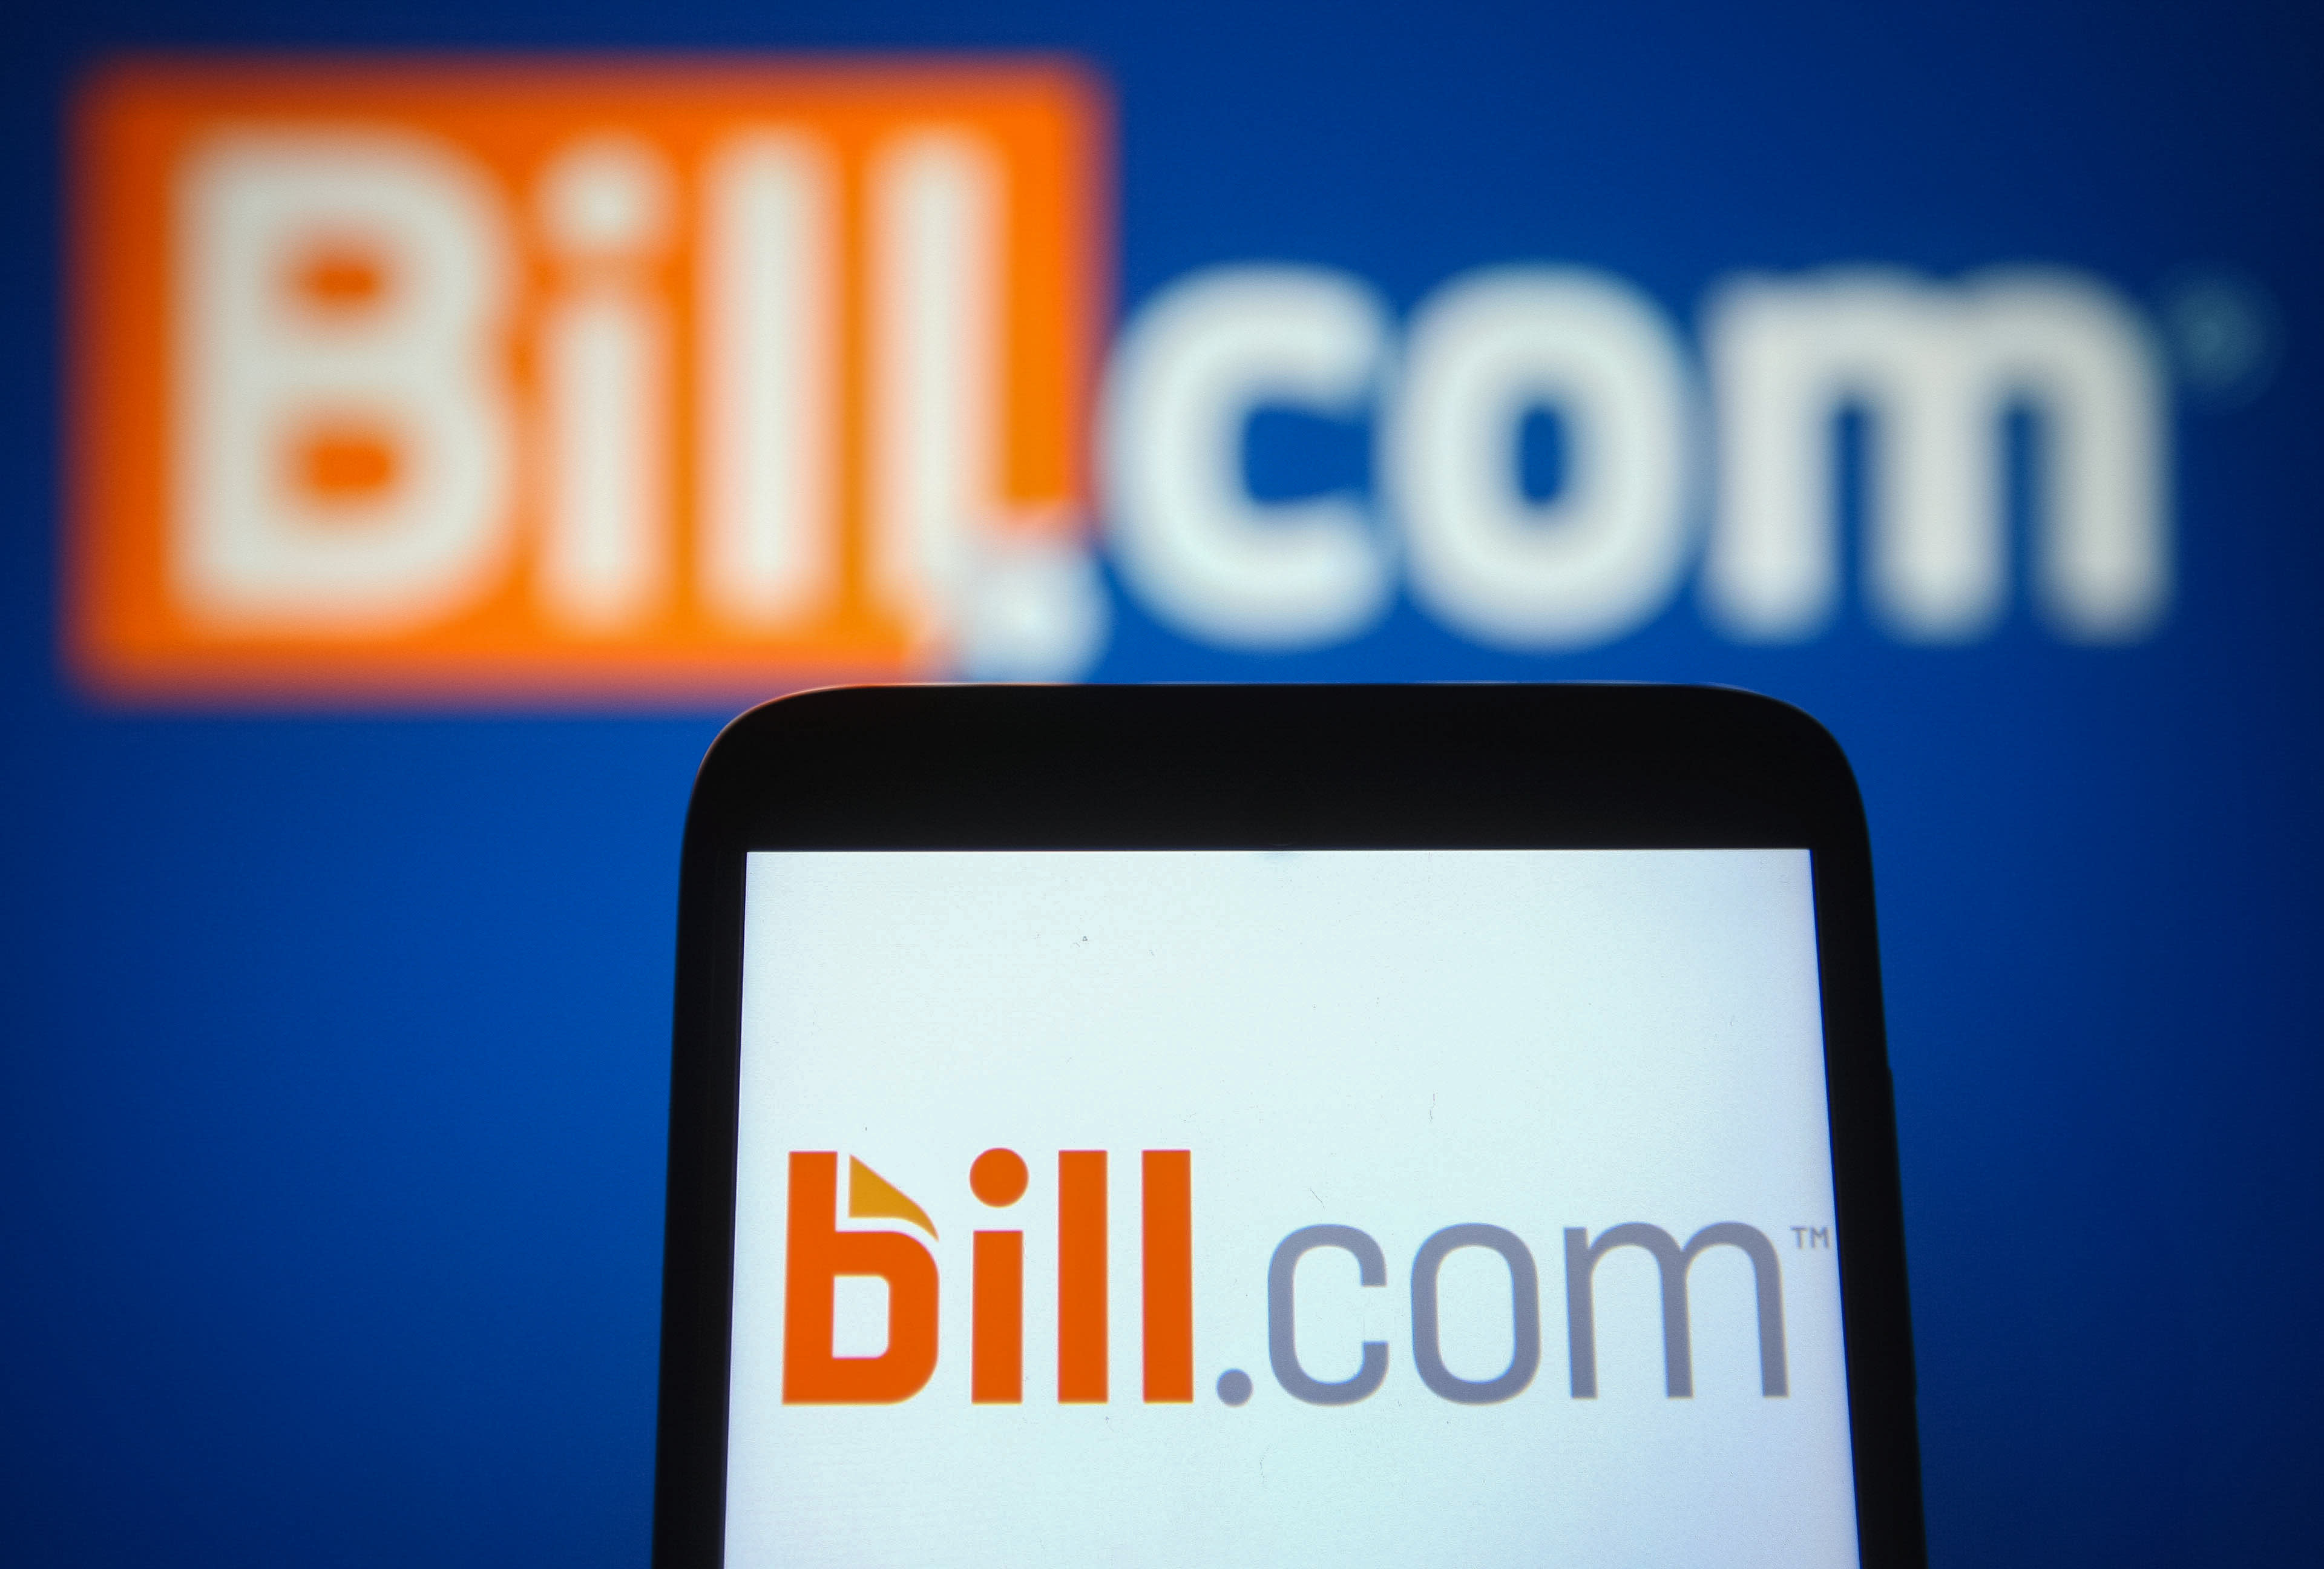 Bills payments stock Bill.com is a buy and can rally 30%, Morgan Stanley says